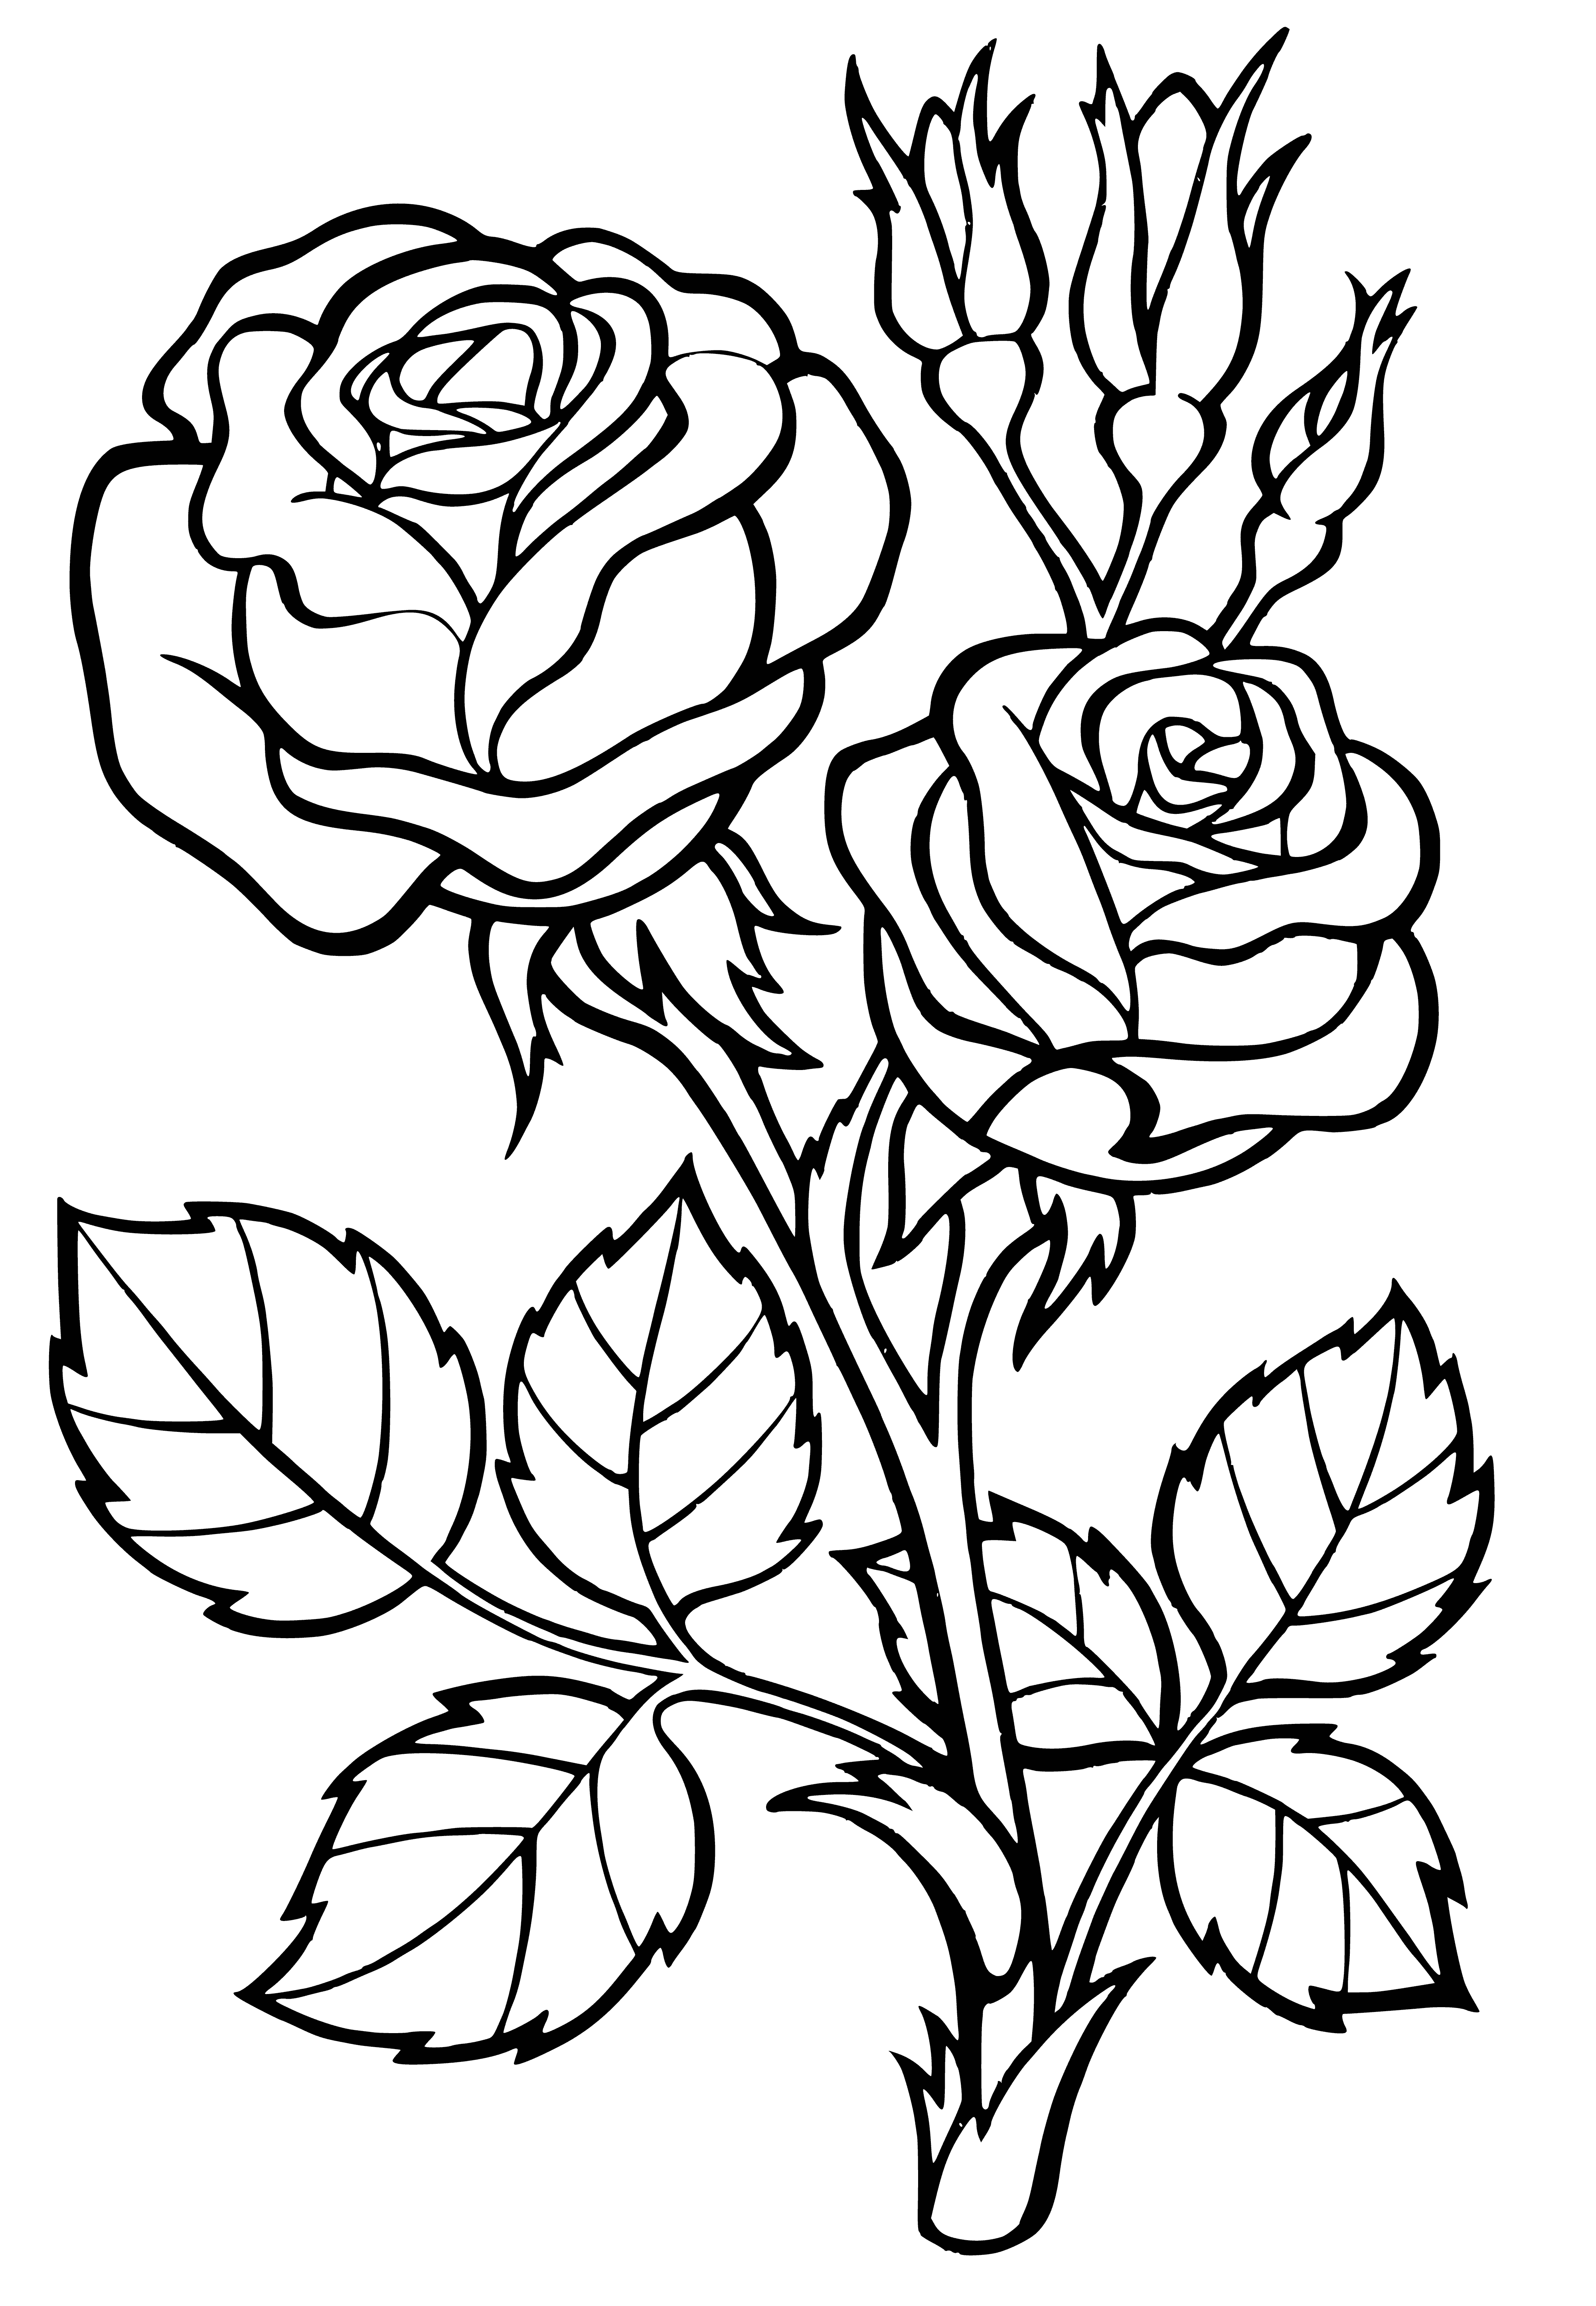 coloring page: Coloring page of red rose in vase with green stem & thorns.